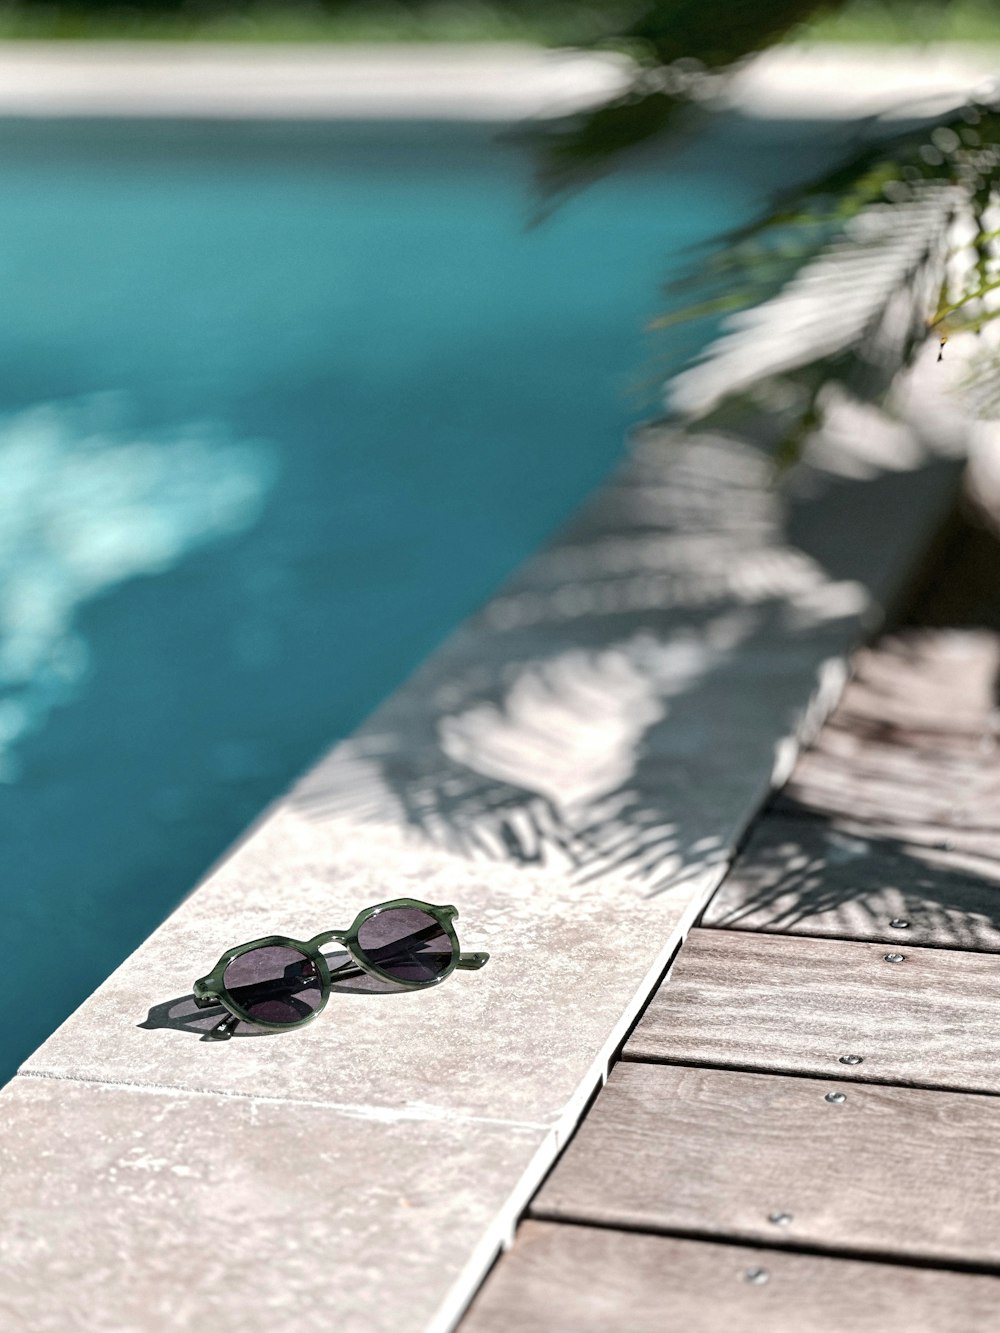 a pair of sunglasses sitting on the edge of a pool